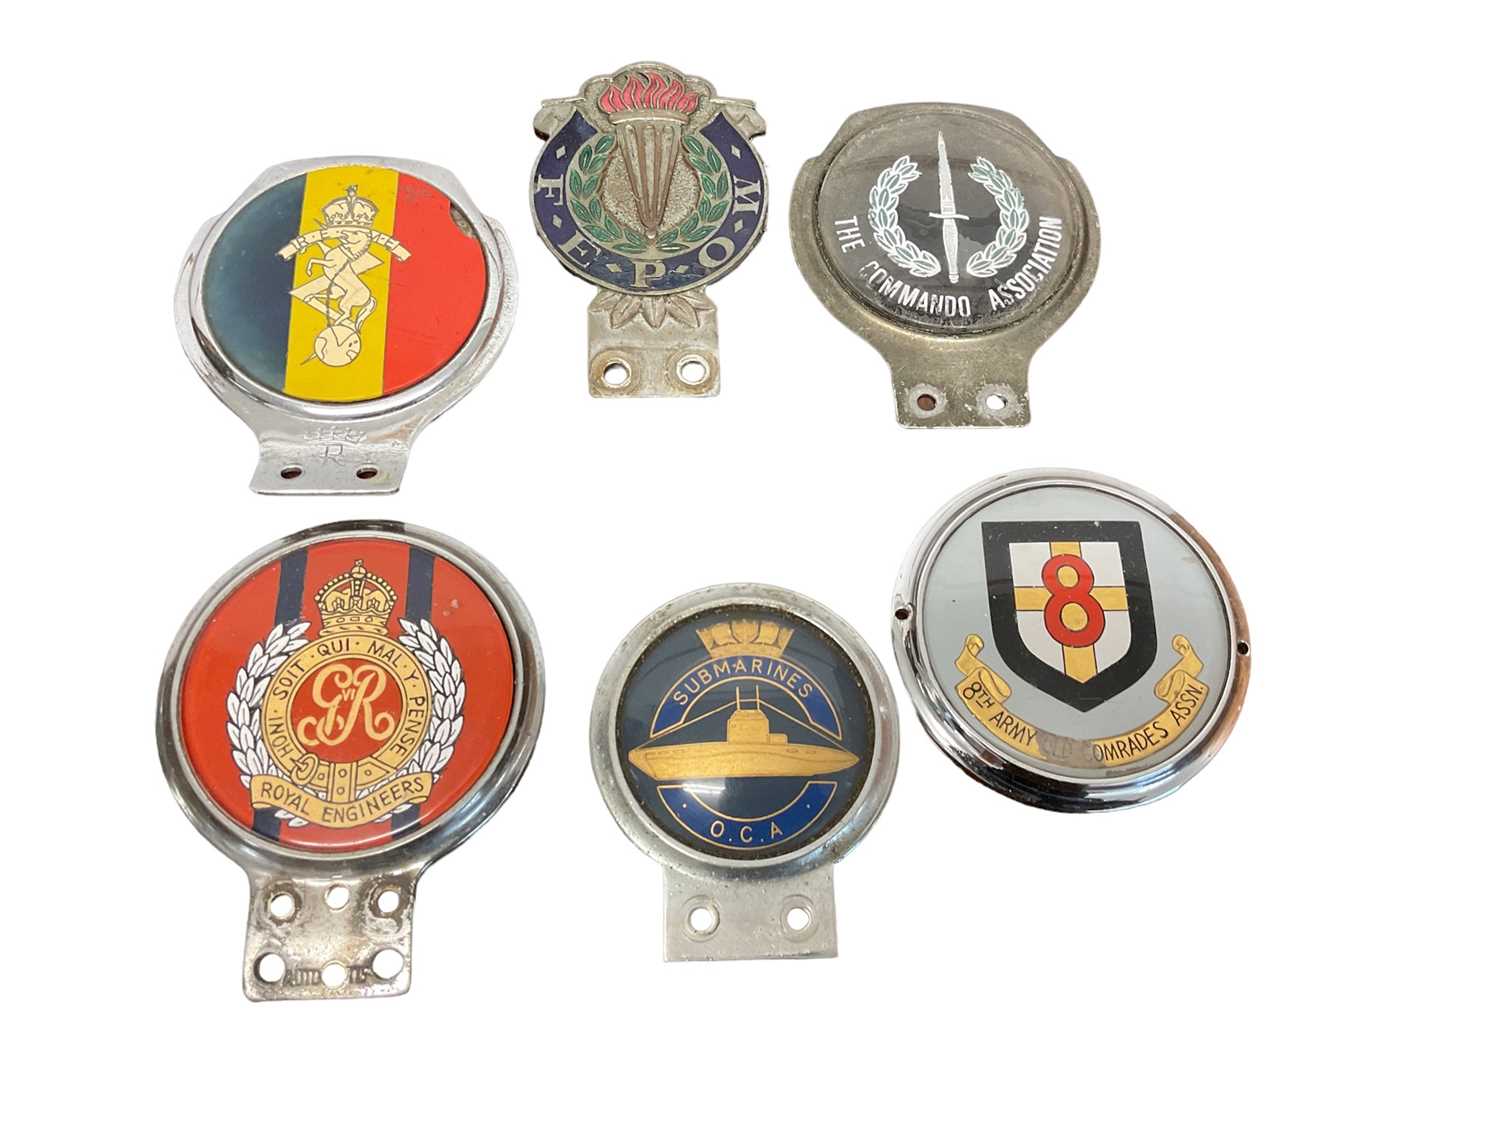 Six old military car badges including The Commando Association (6)